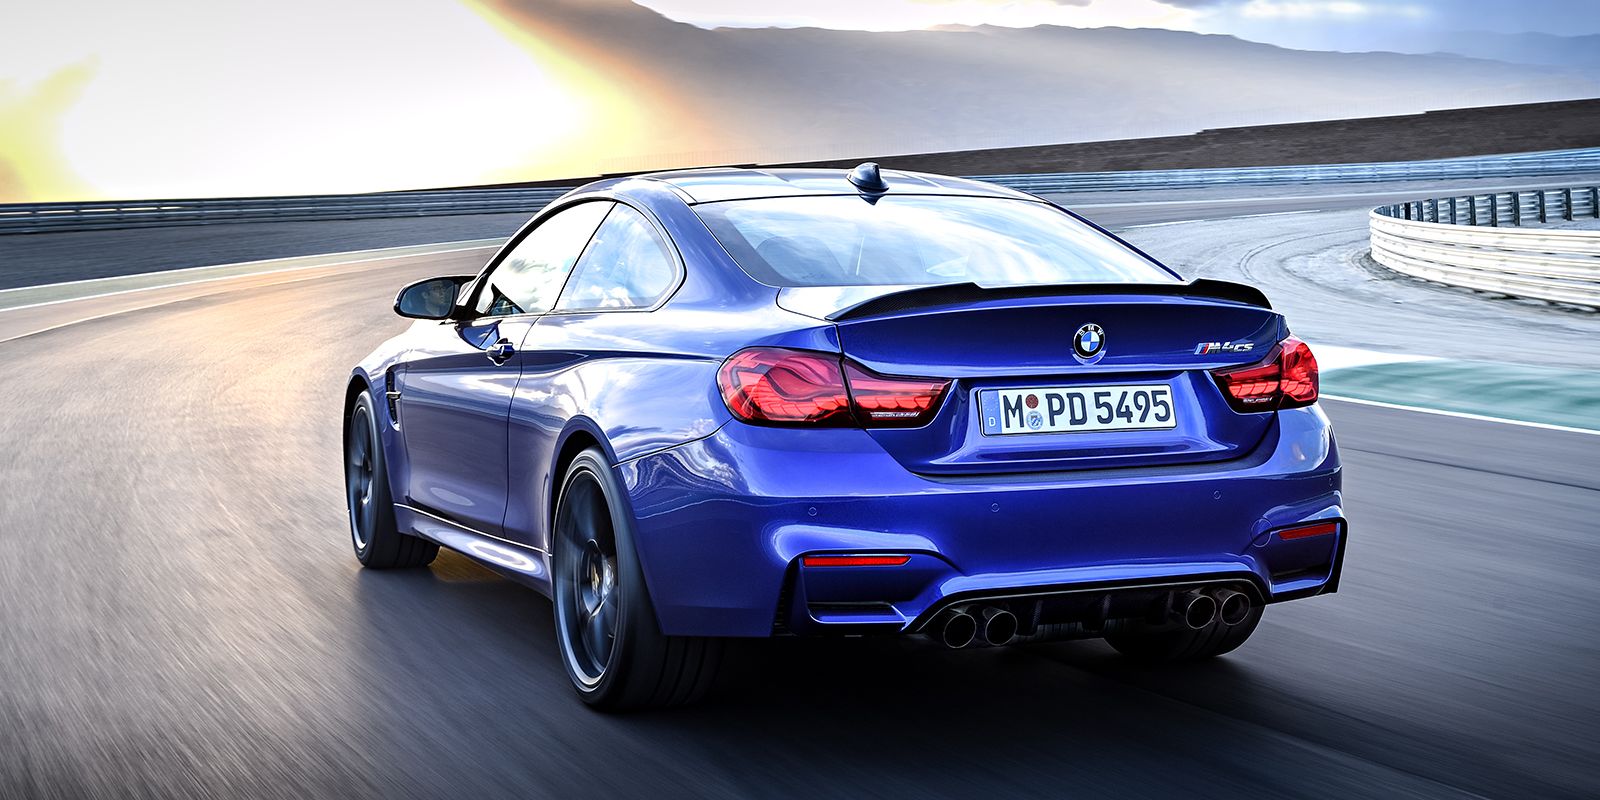 The 2018 BMW M4 CS Is Here With 454 Horses but No Manual Transmission